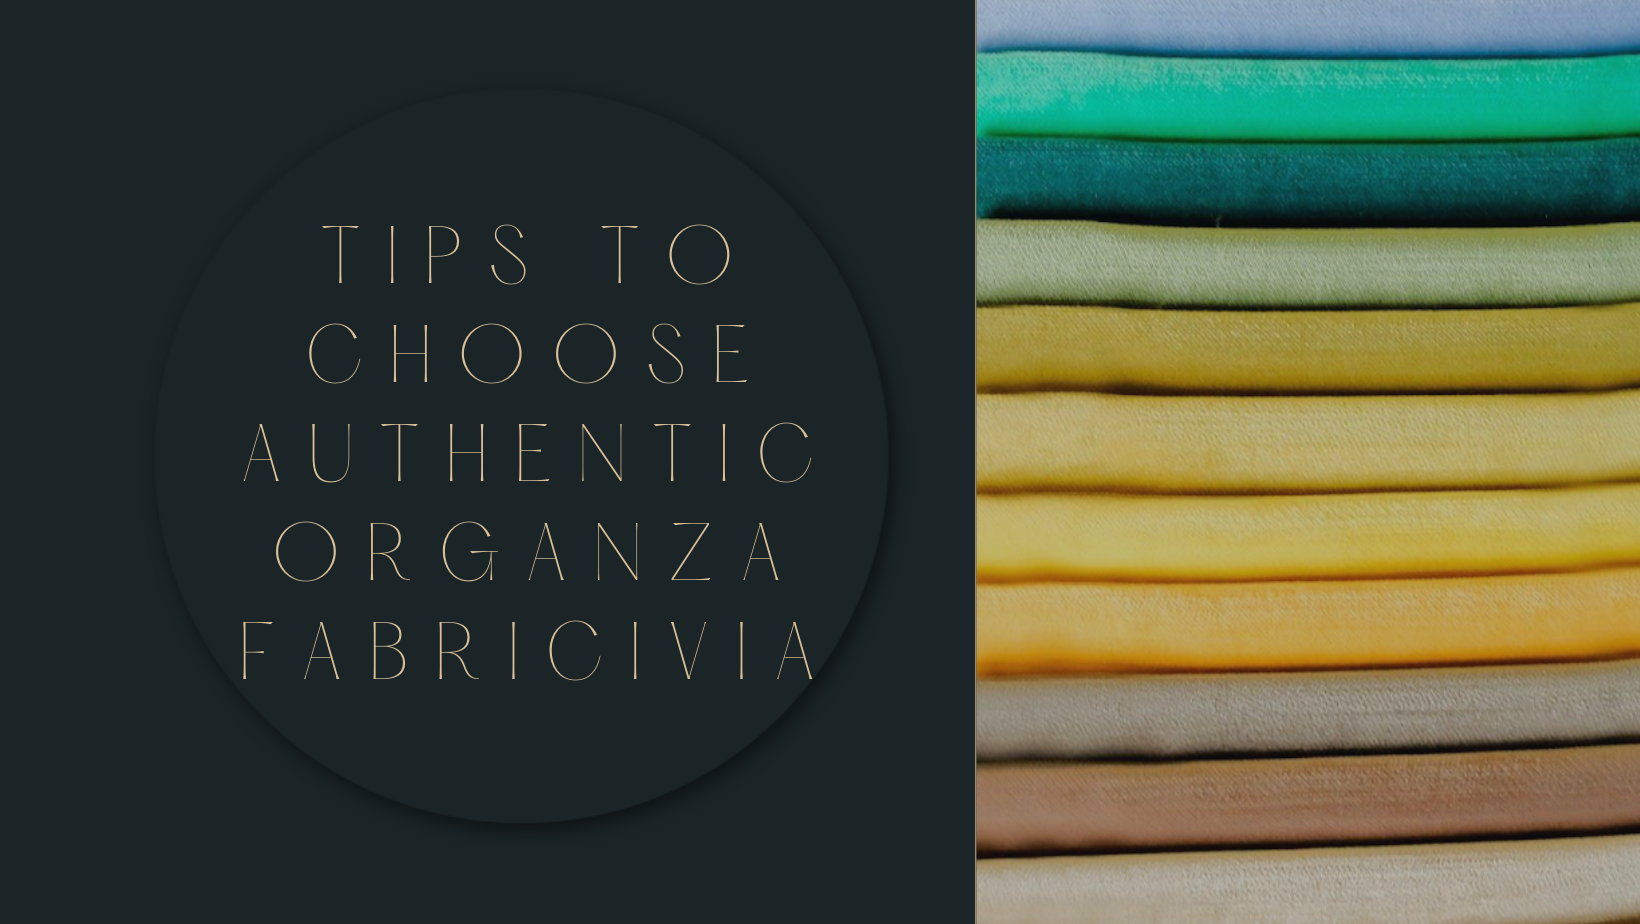 Tips To Choose Authentic Organza Fabric